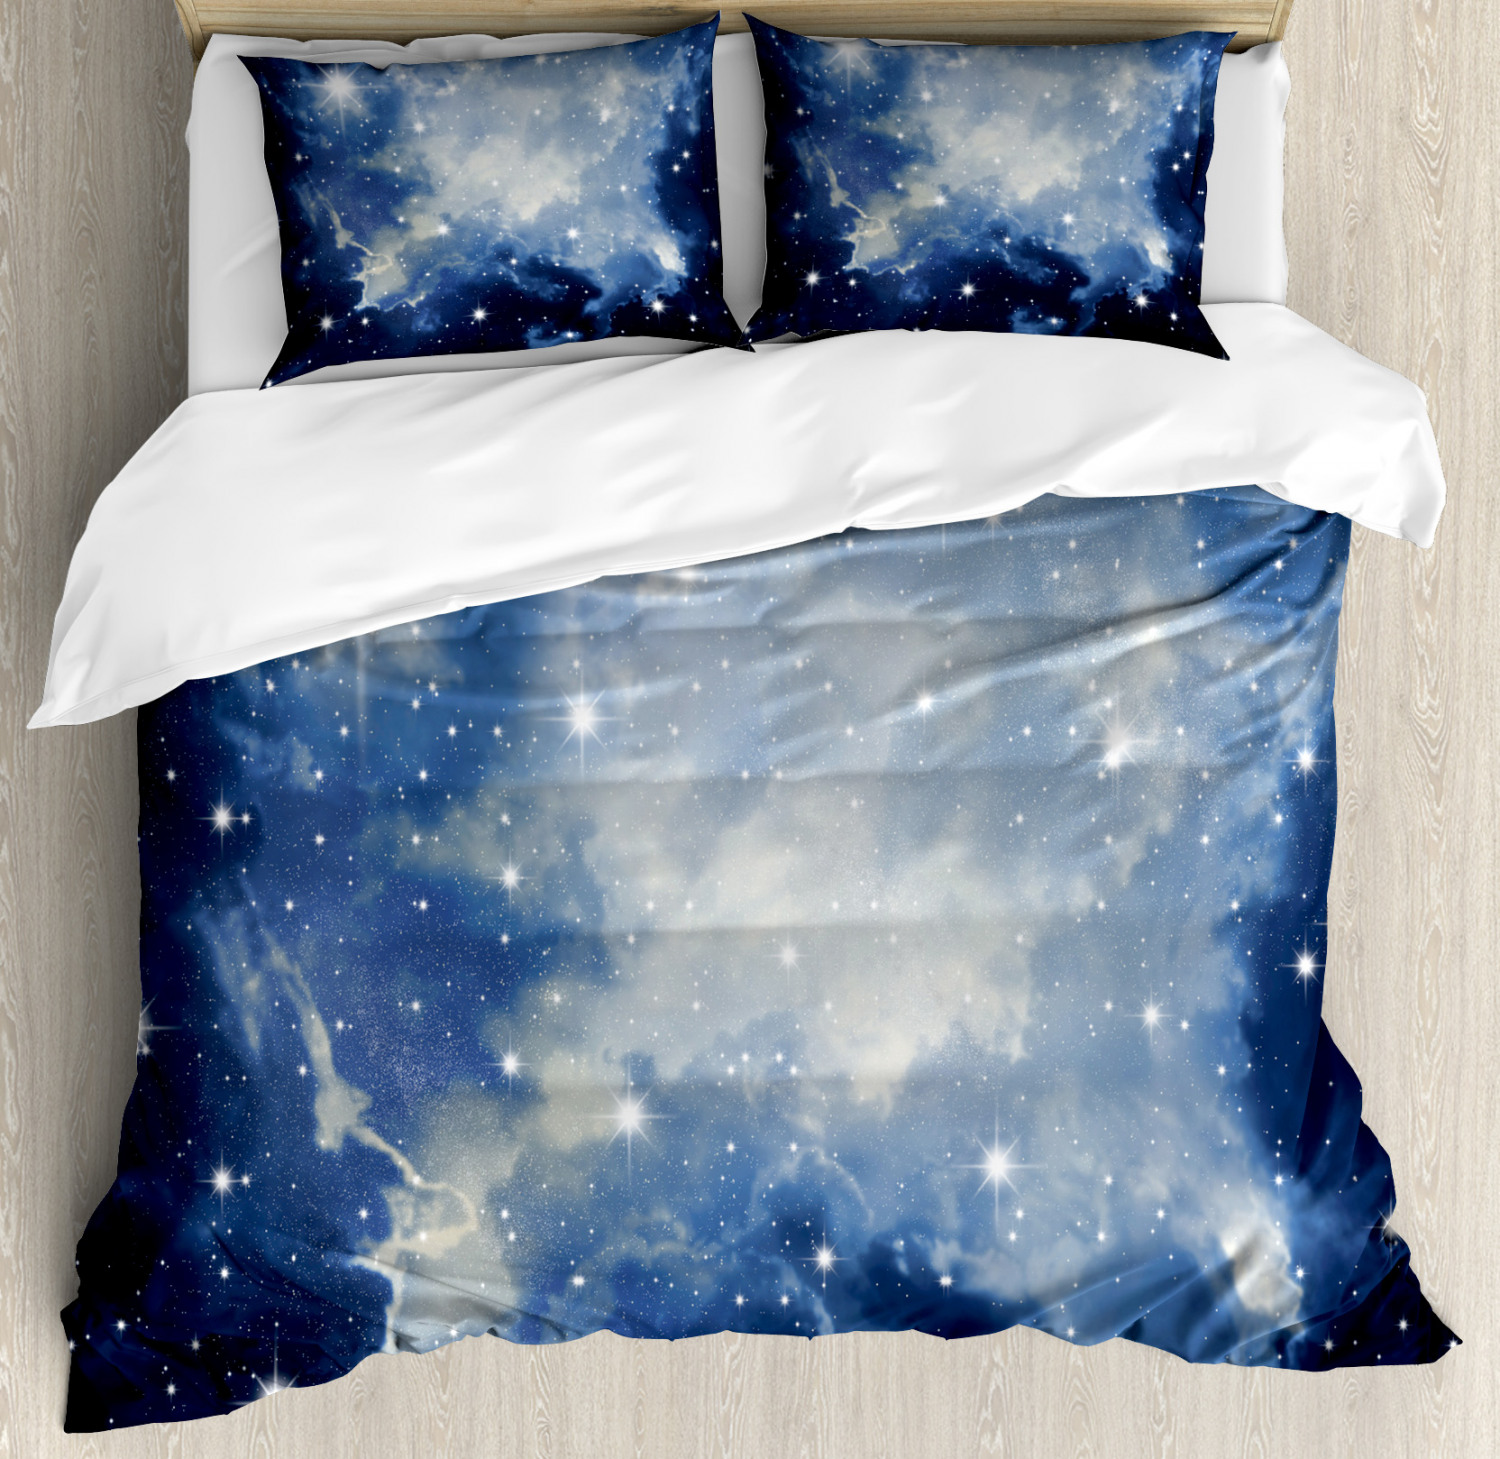 Constellation Duvet Cover Set With Pillow Shams Blue Galaxies